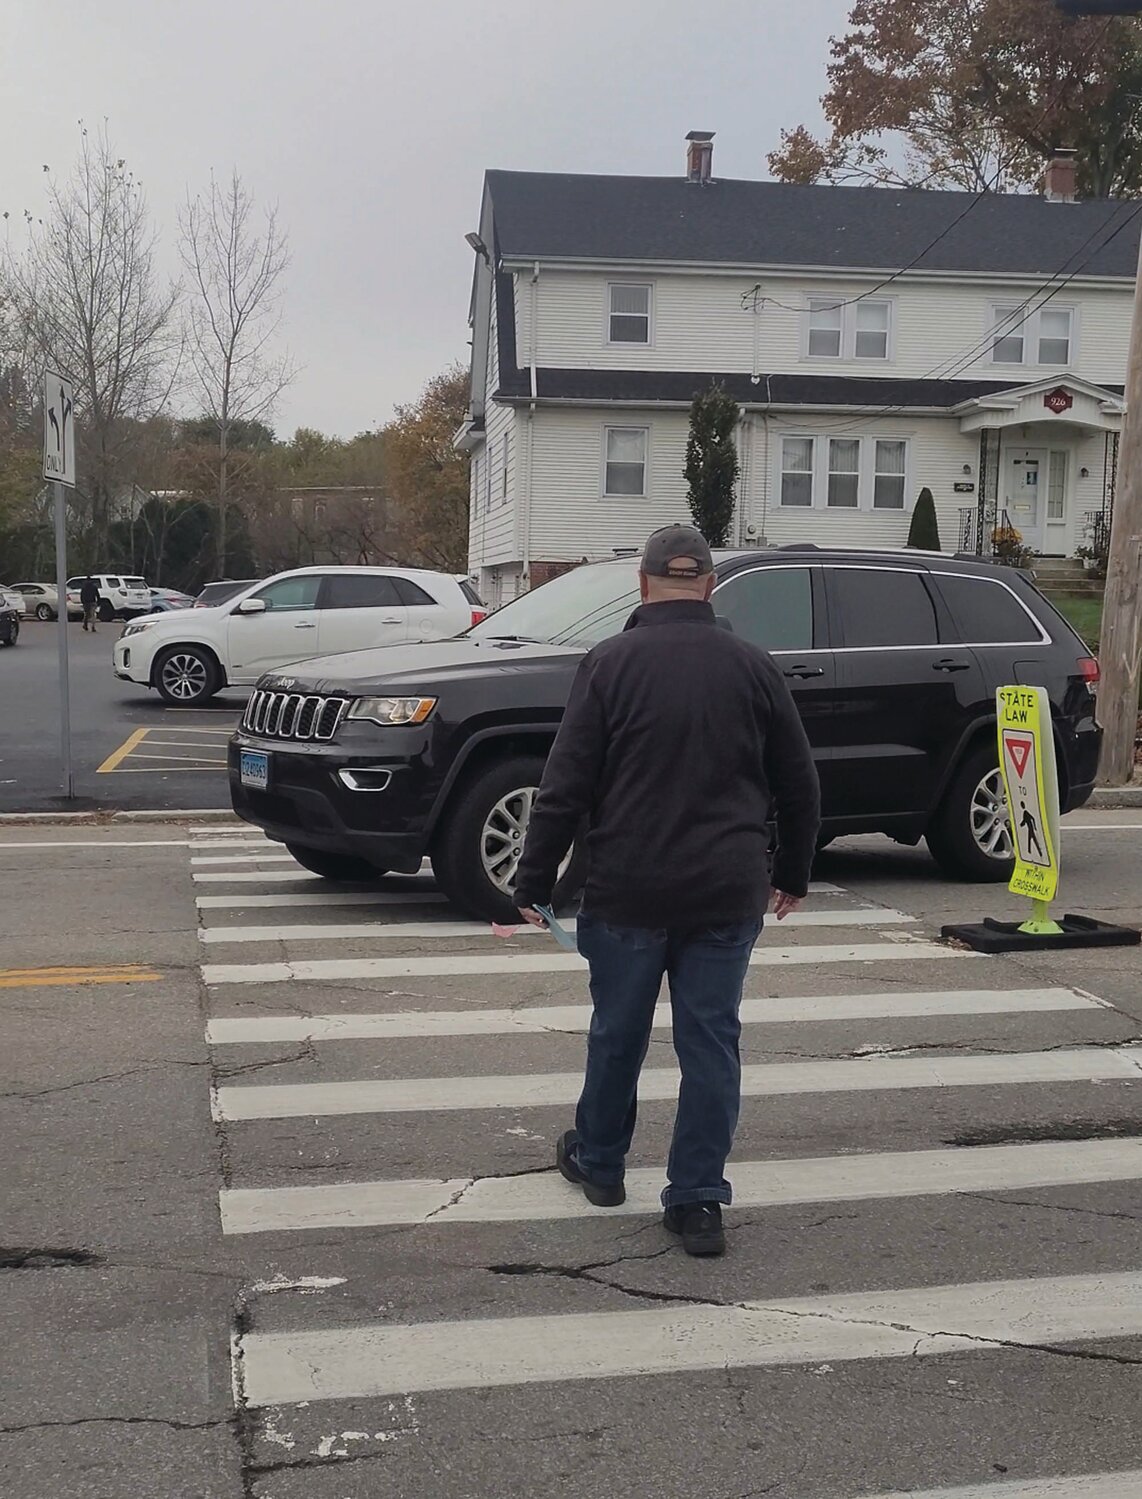 CLOSE CALL: Pedestrians attempt to cross Atwood Avenue outside St. Rocco Church following the school’s Veterans Day prayer service on Friday. A driver narrowly missed several people in the crosswalk after failing to yield. Johnston Police cited the driver, based on video captured by the Johnston Sun Rise.